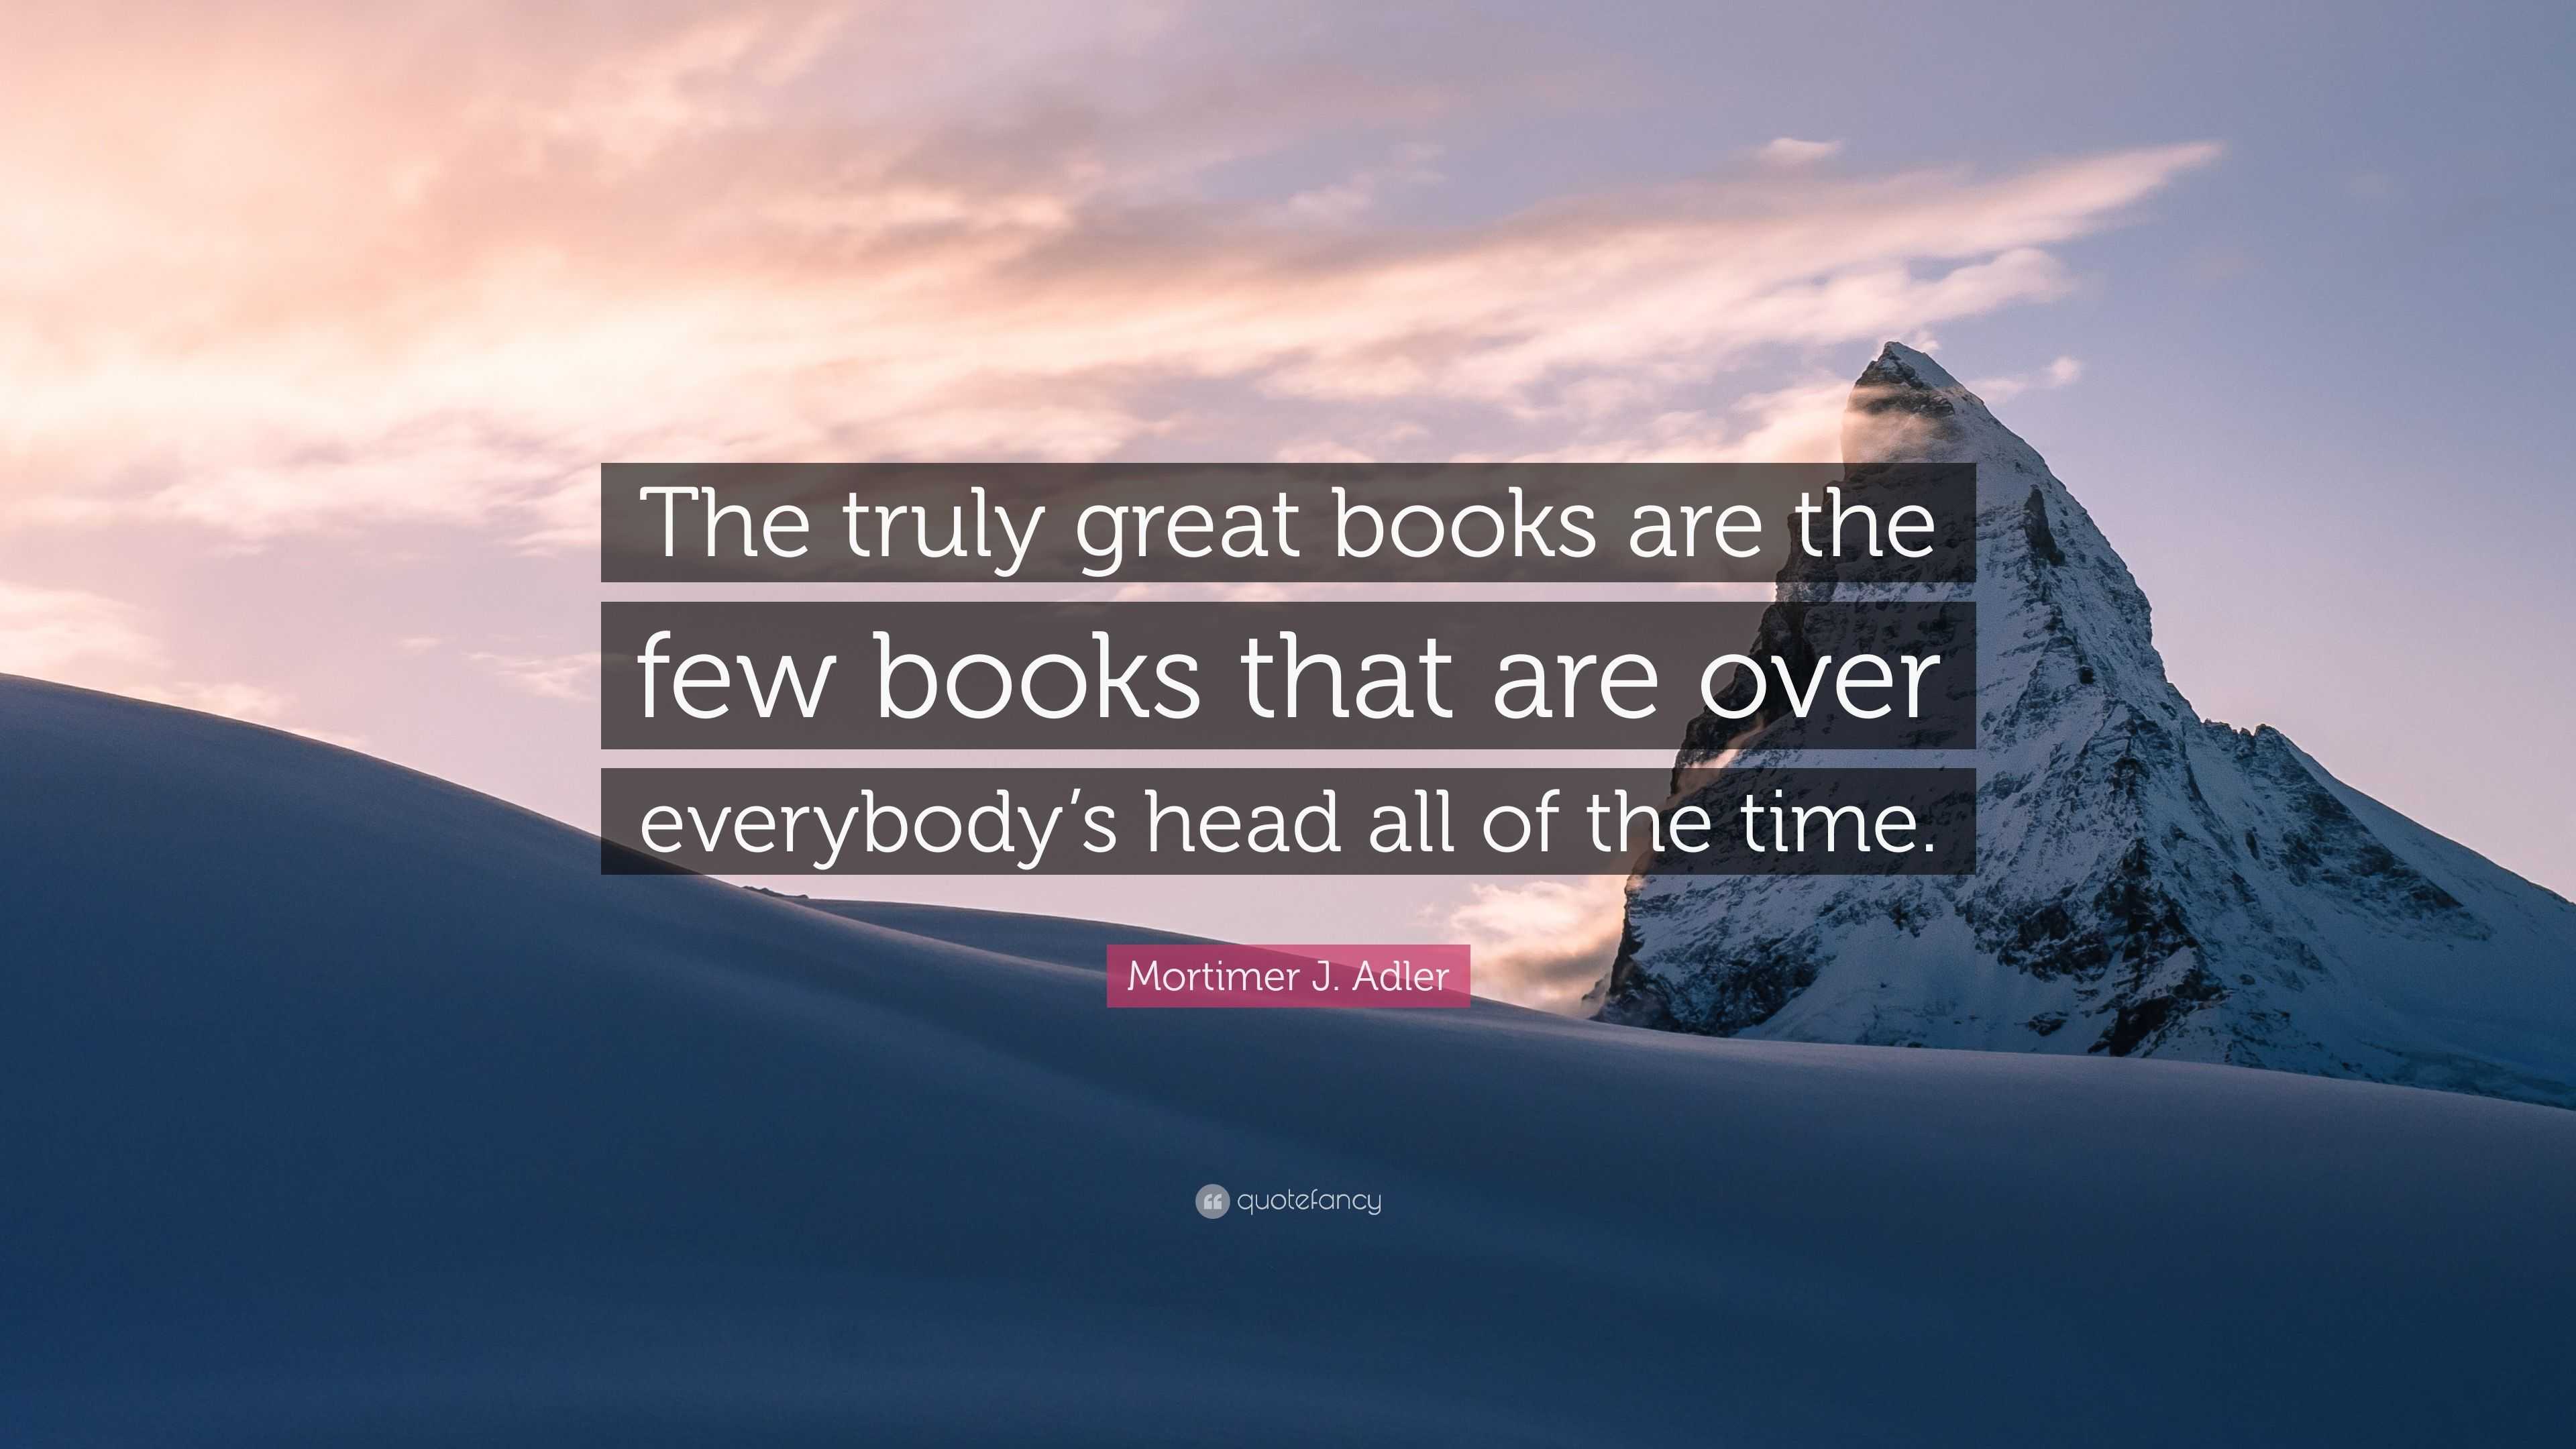 Mortimer J. Adler Quote: “The truly great books are the few books that ...